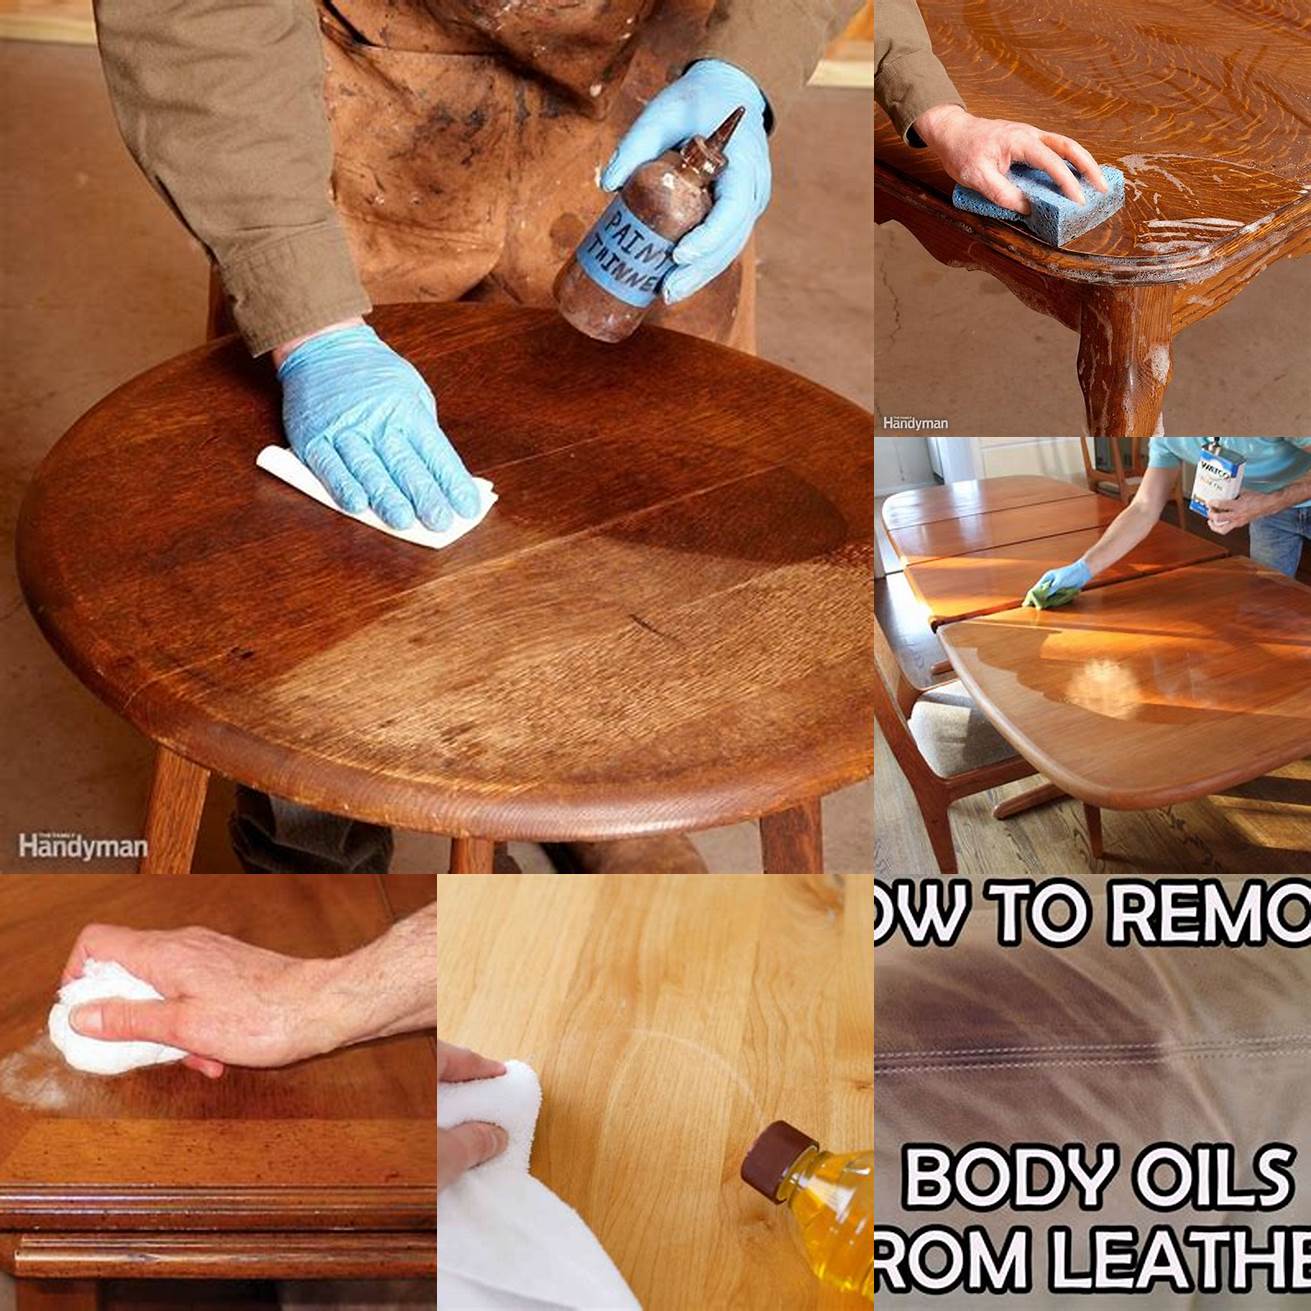 Removing excess oil